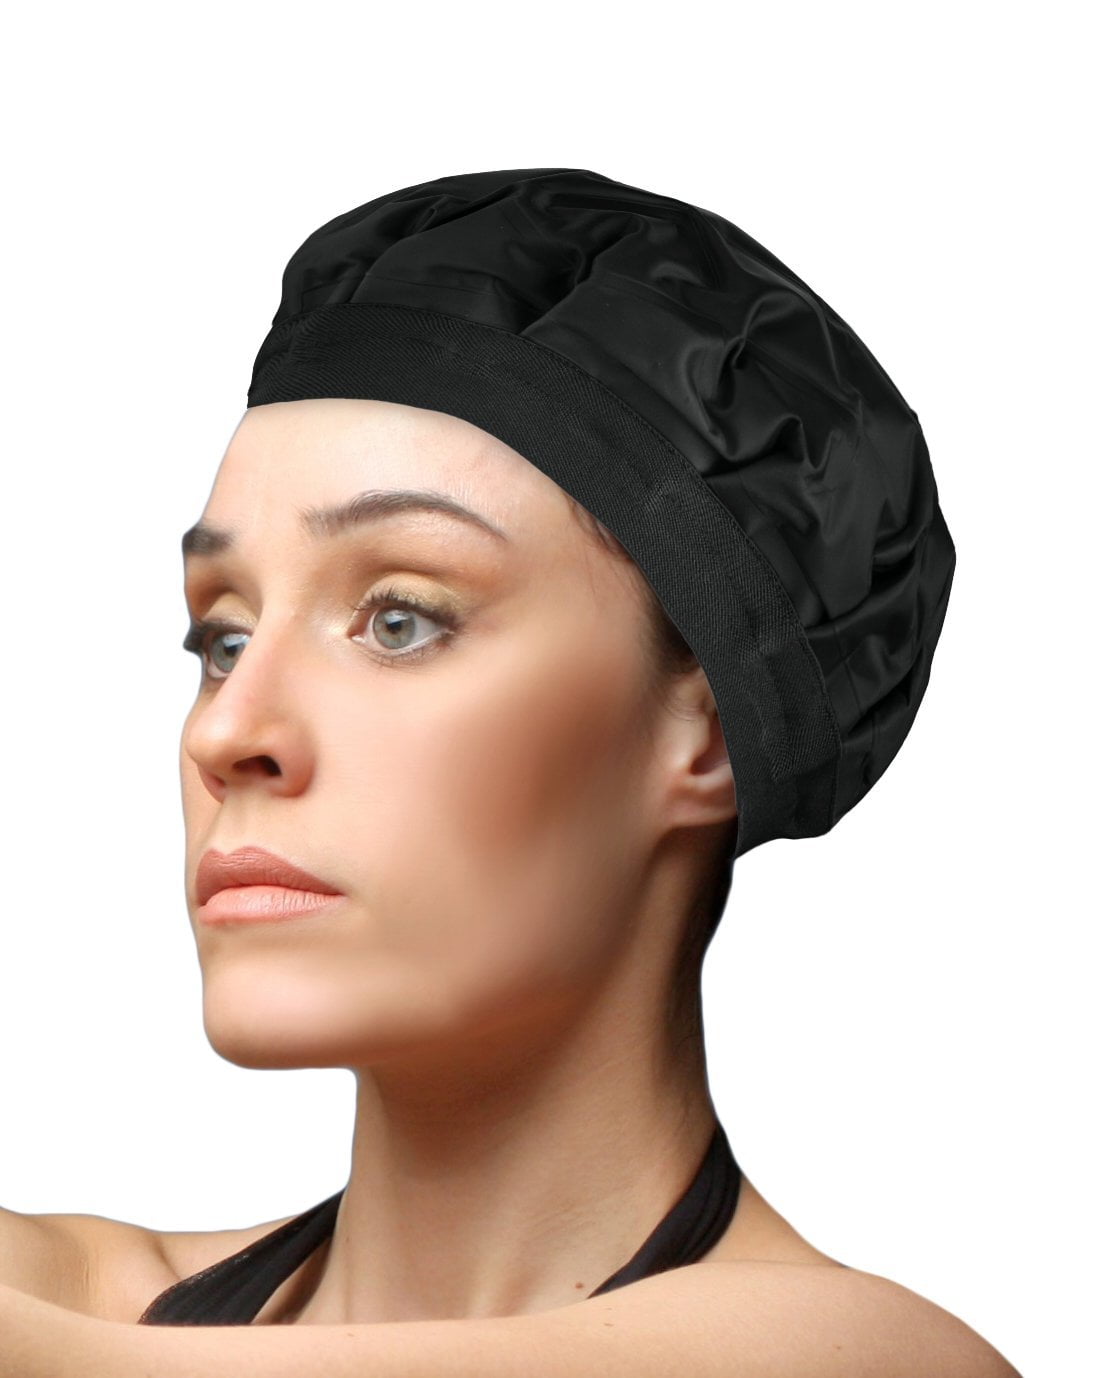 Cordless Deep Conditioning Heat Cap - Hair Styling and Treatment Steam Cap  | Heat Therapy and Thermal Spa Hair Steamer Gel Cap - Black 